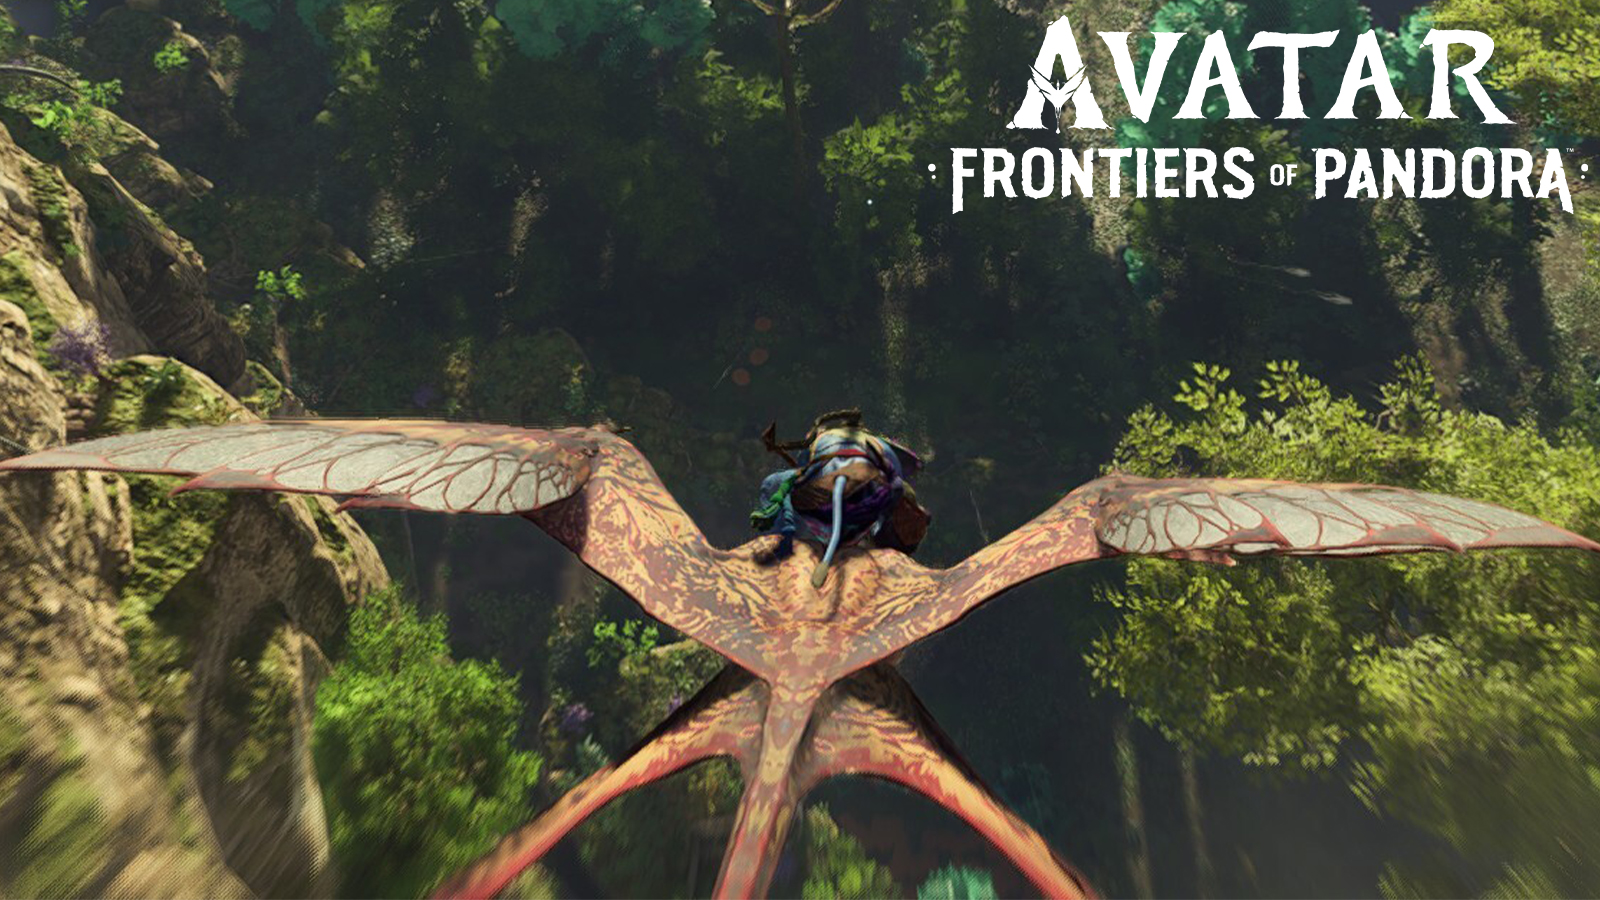 Does Avatar: Frontiers of Pandora Have Crossplay & Cross-Progression?